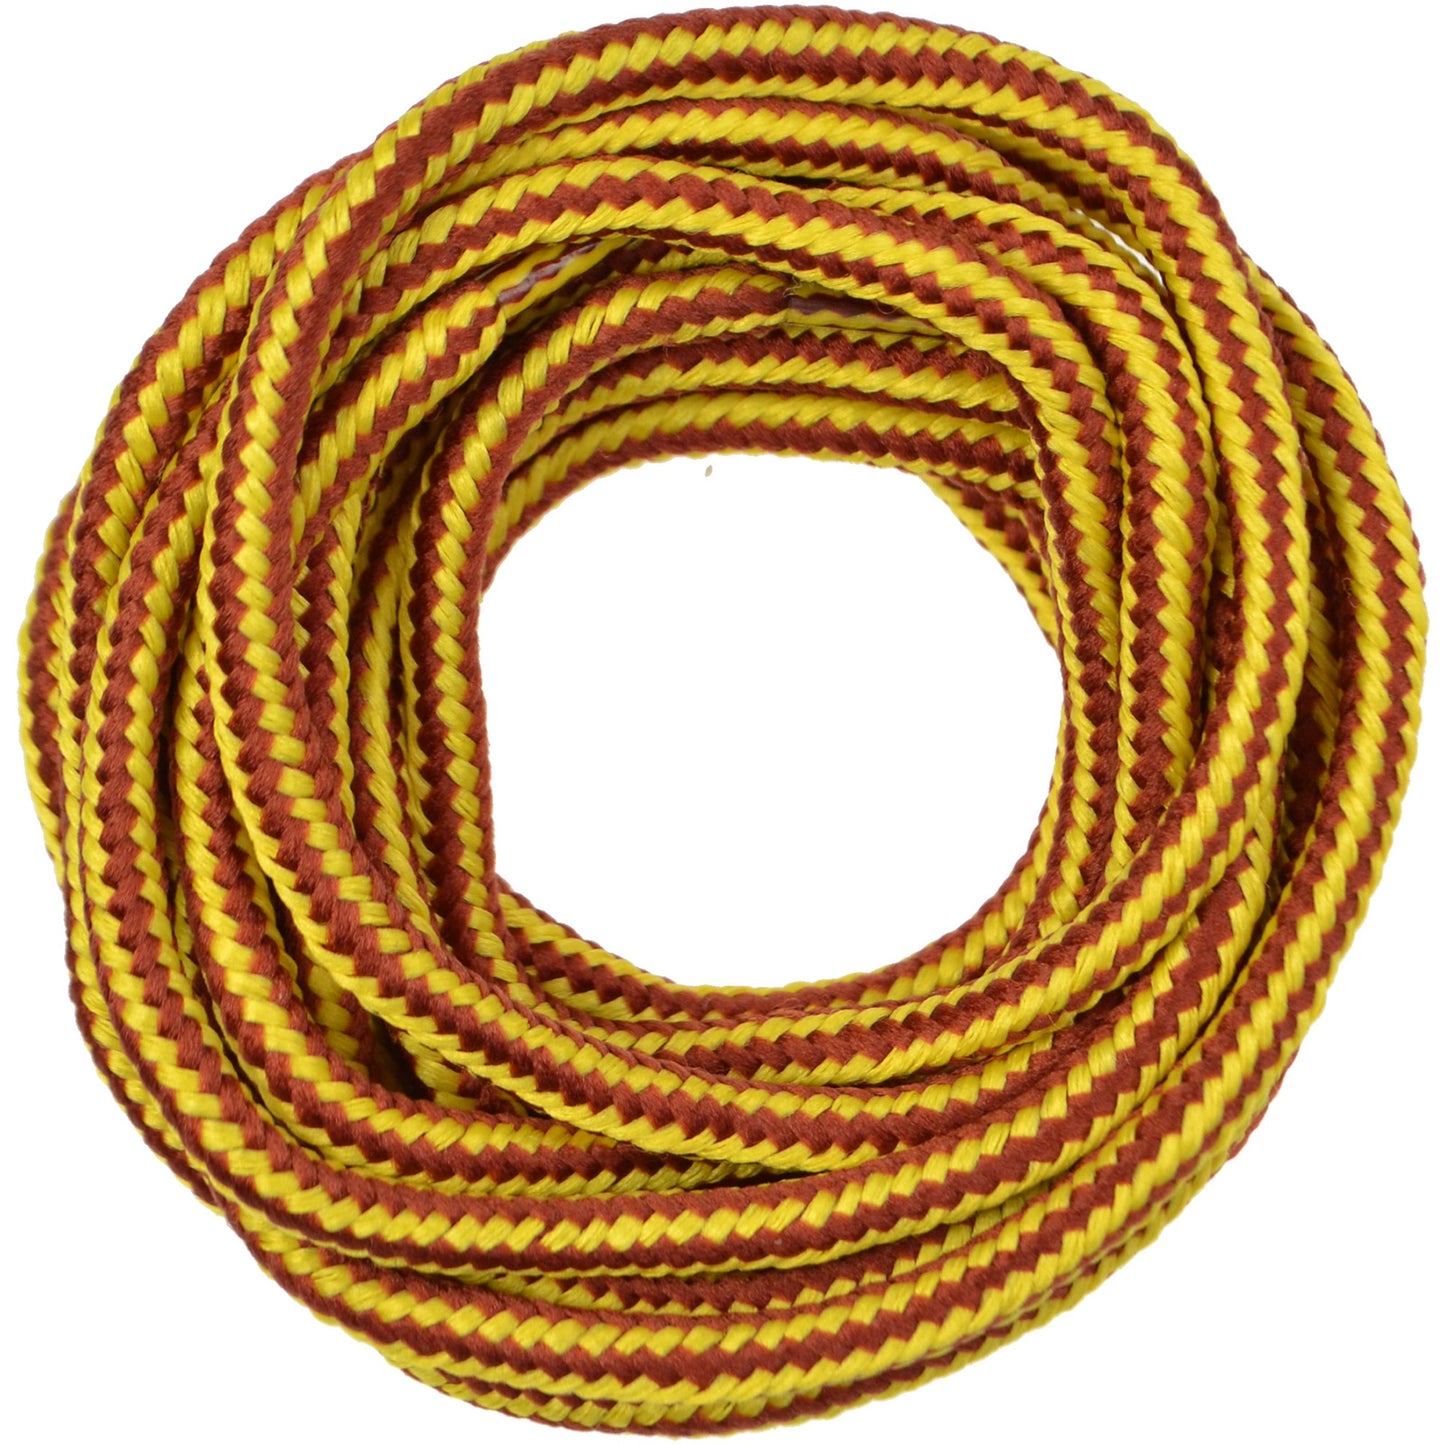 150cm Worksite Cord Work Boot Shoe Laces - Gold/Brown